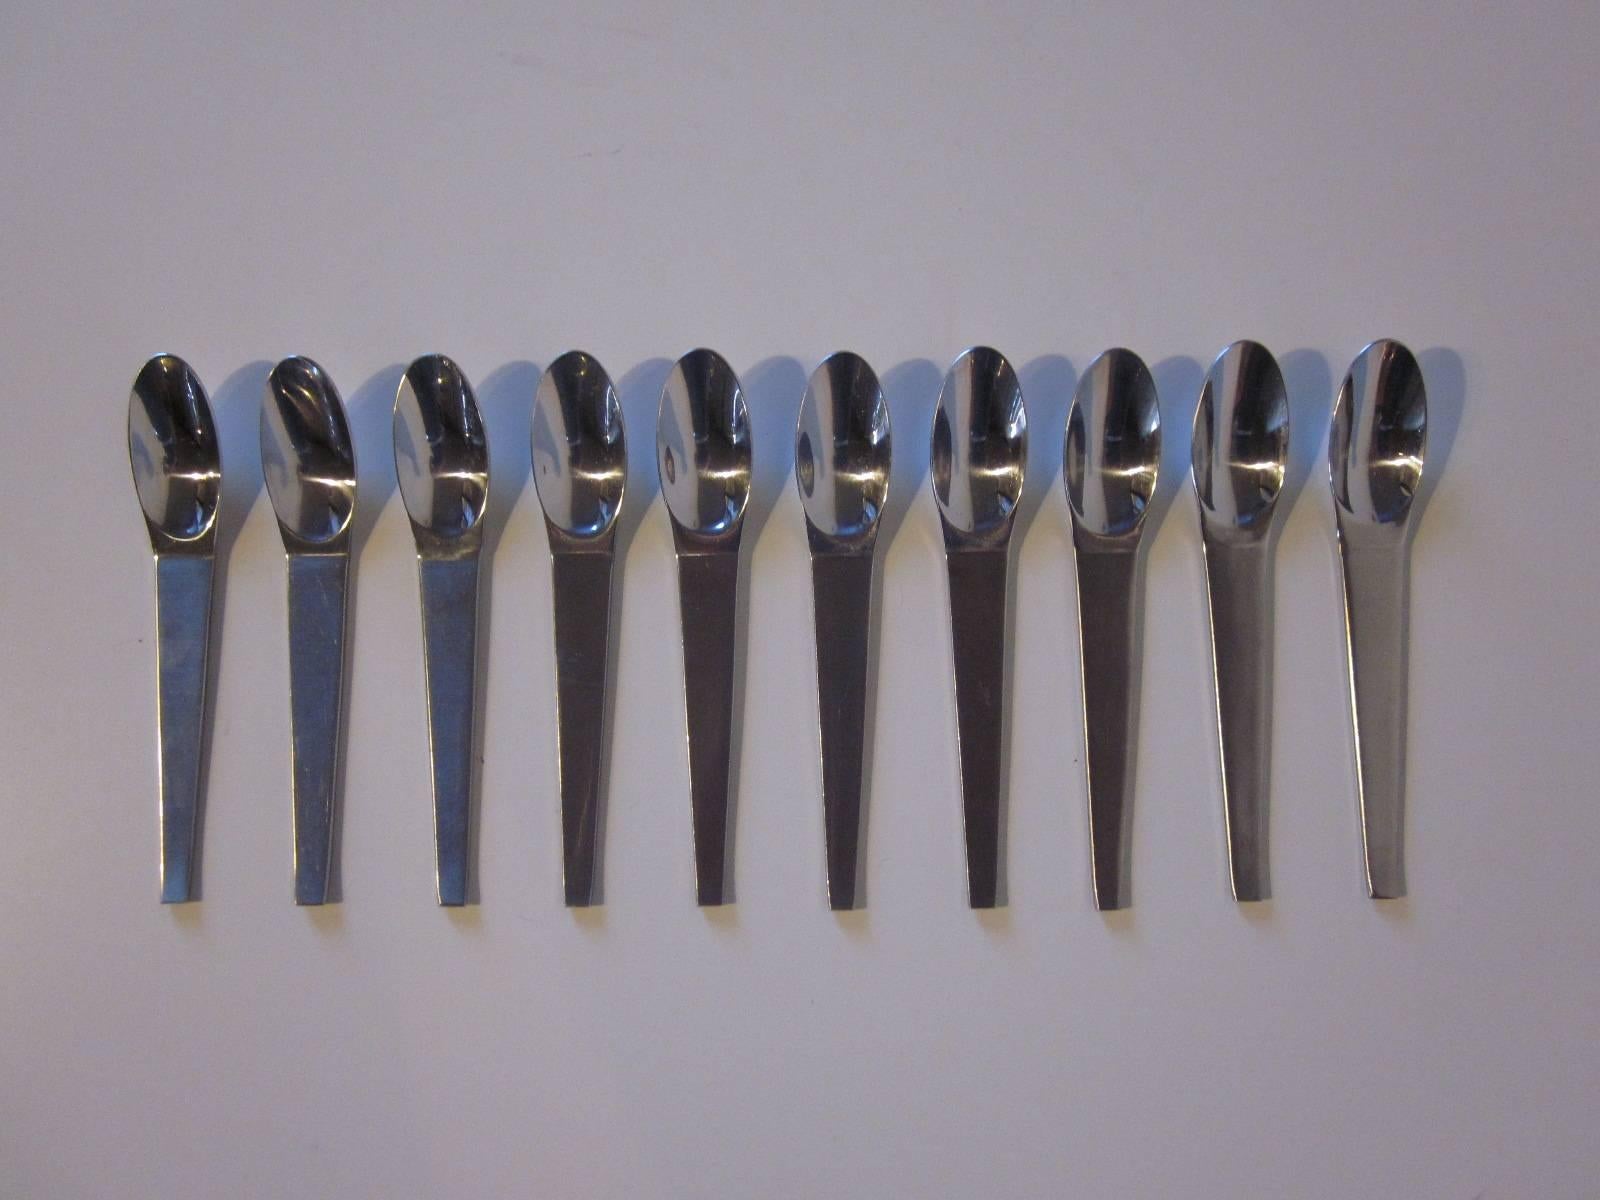 A set of ten modernist designed stainless steel teaspoon designed by Carl Auböck and manufactured by Maestro Amboss Werk and made in Austria.